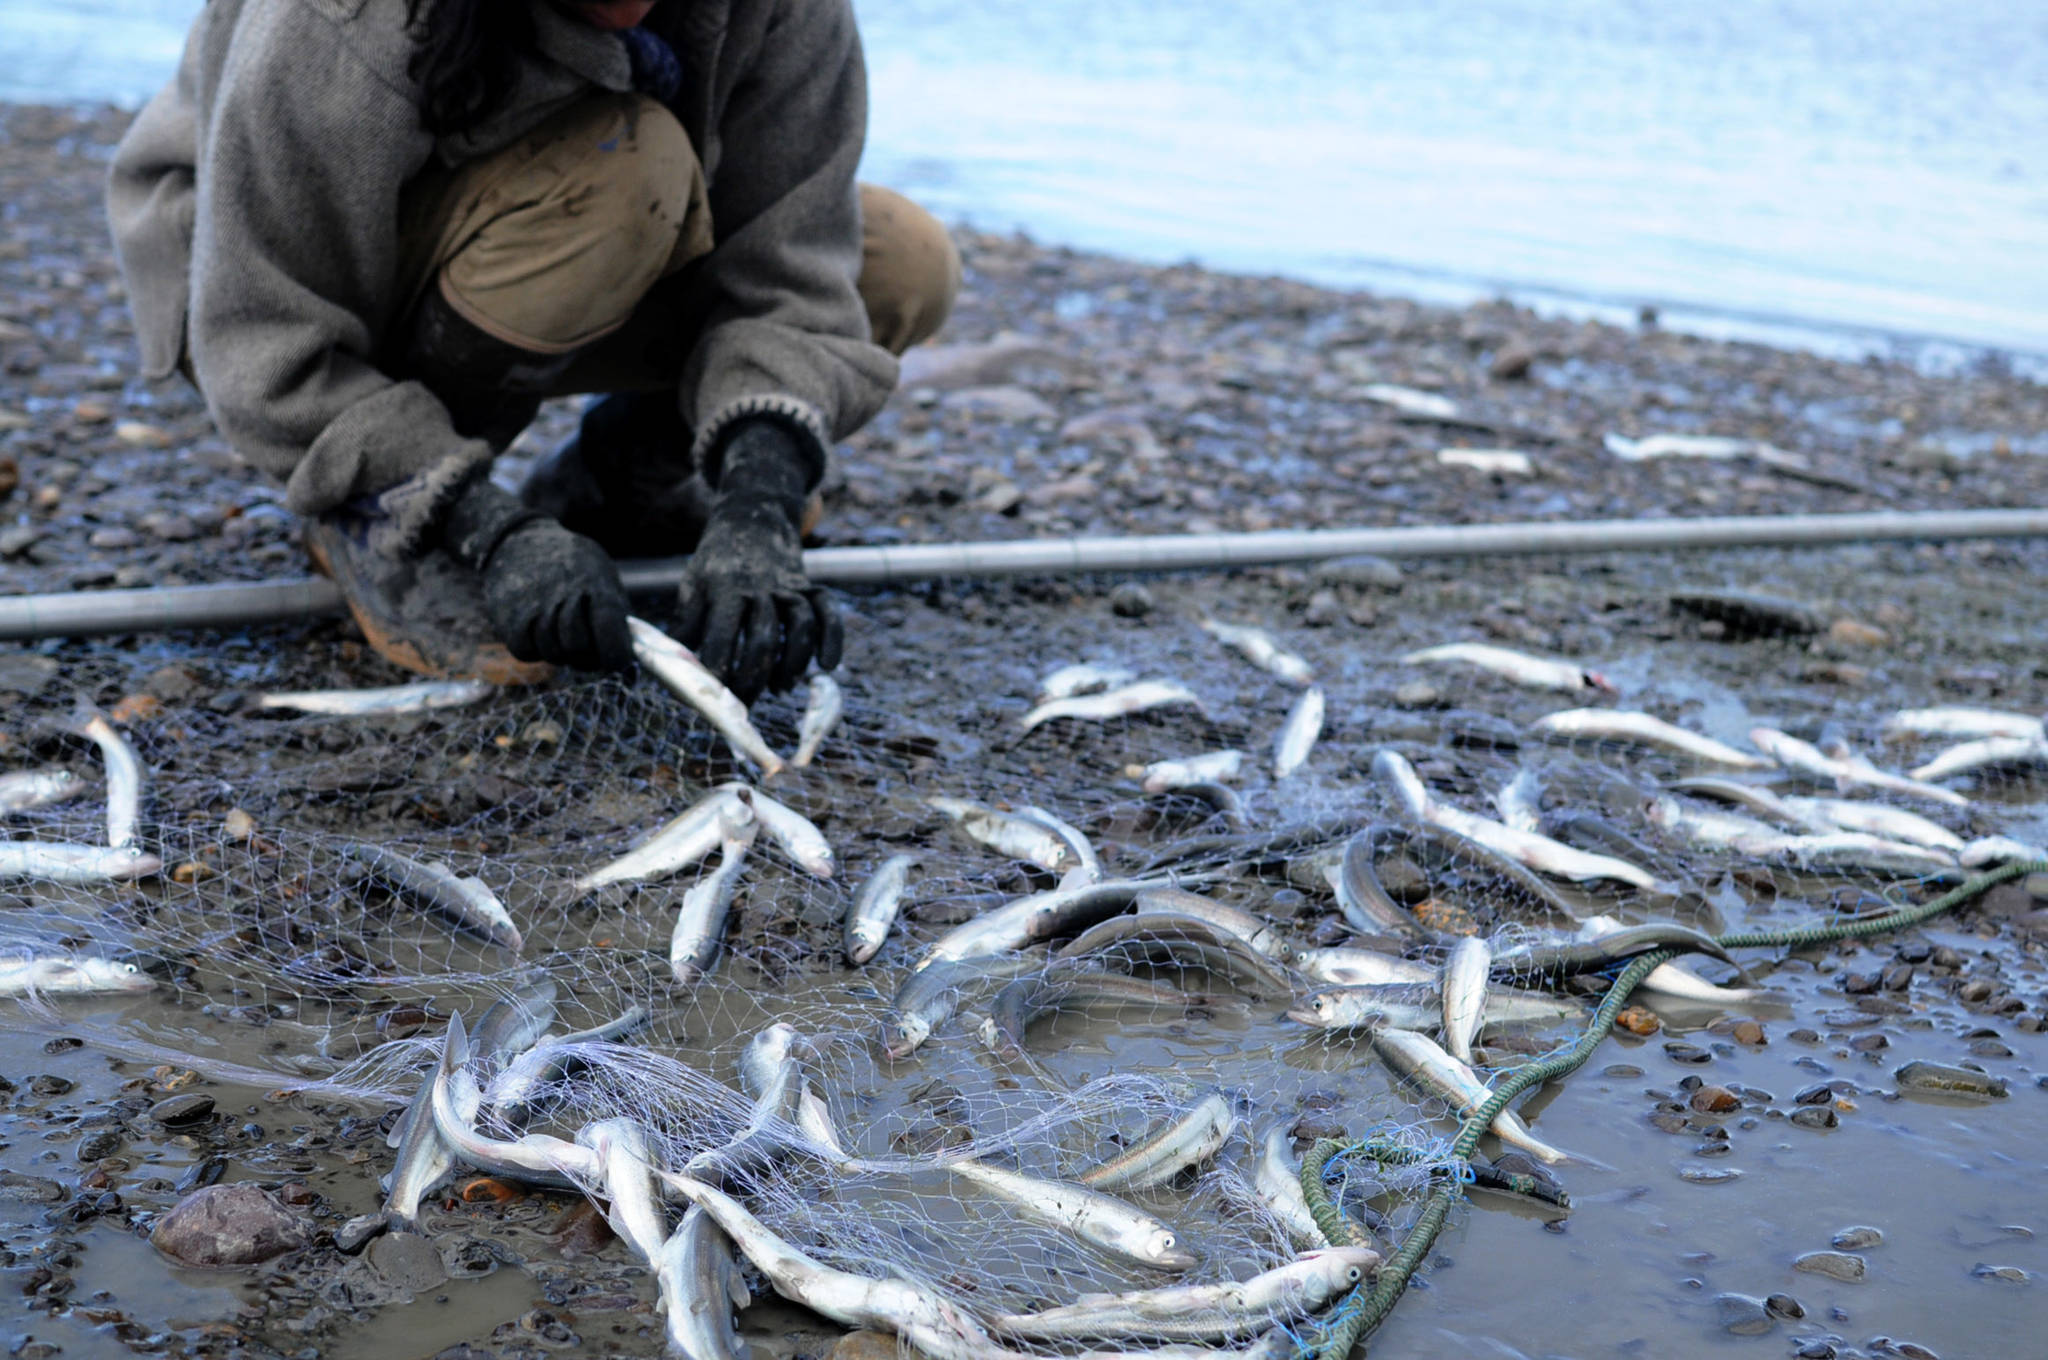 Tasha Wang of Homer disentangles hooligan from a gillnet on the banks of the Kenai River near the Warren Ames Bridge on Monday, May 14, 2018 in Kenai, Alaska. Hooligan, also called eulachon, are small oily fish that return to the rivers across Upper Cook Inlet in April, May and early June. (Photo by Elizabeth Earl/Peninsula Clarion)